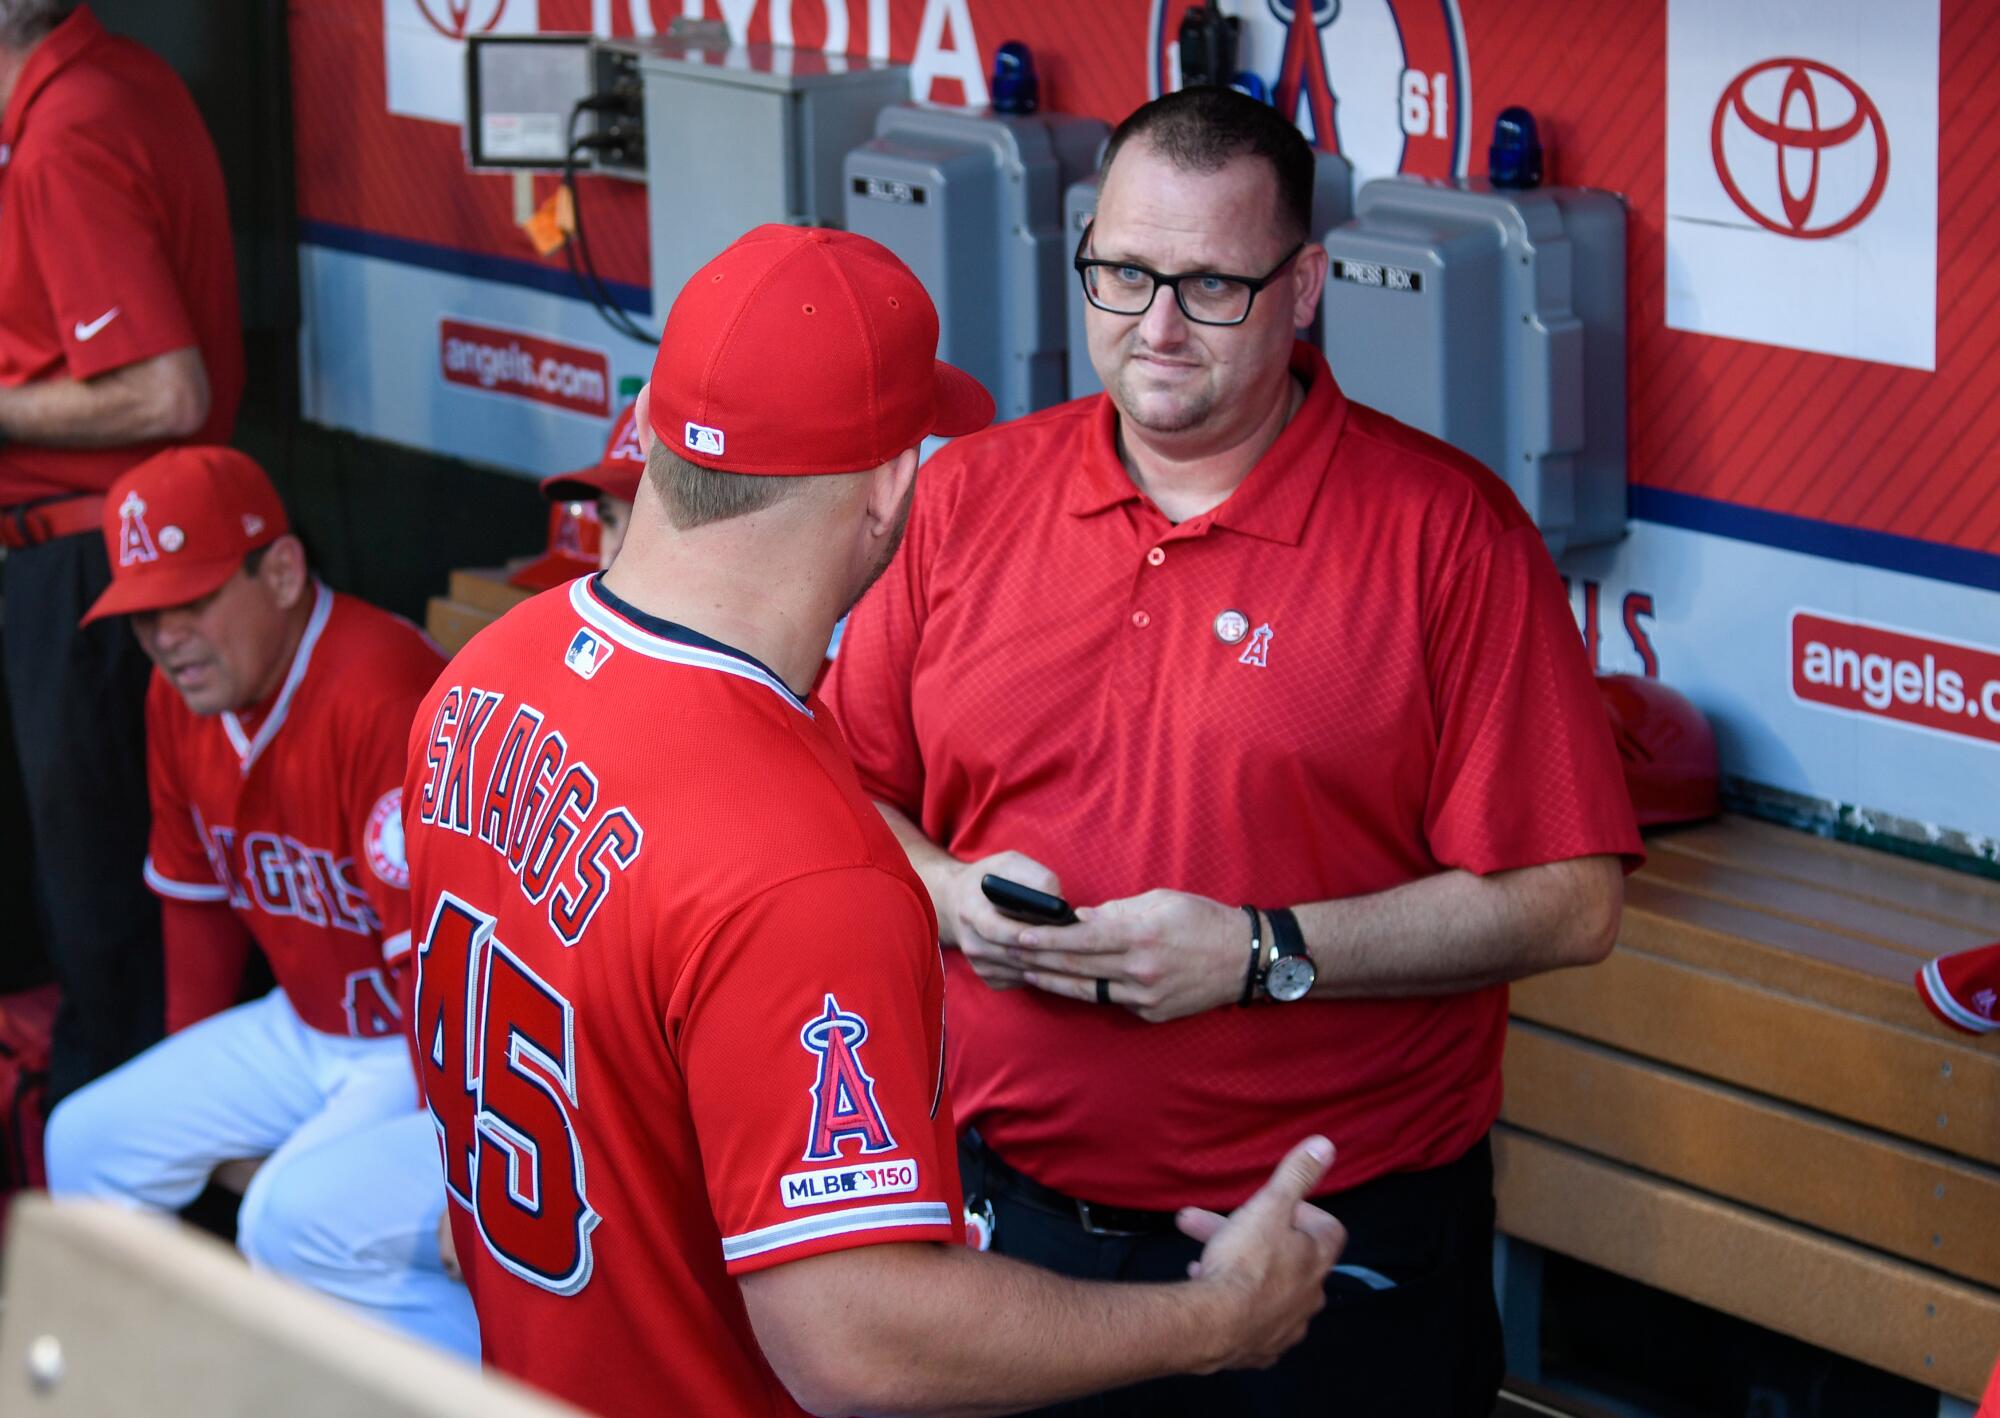 Angels star Mike Trout, left, wears a red Tyler Skaggs jersey while speaking to Eric Kay in the dugout 